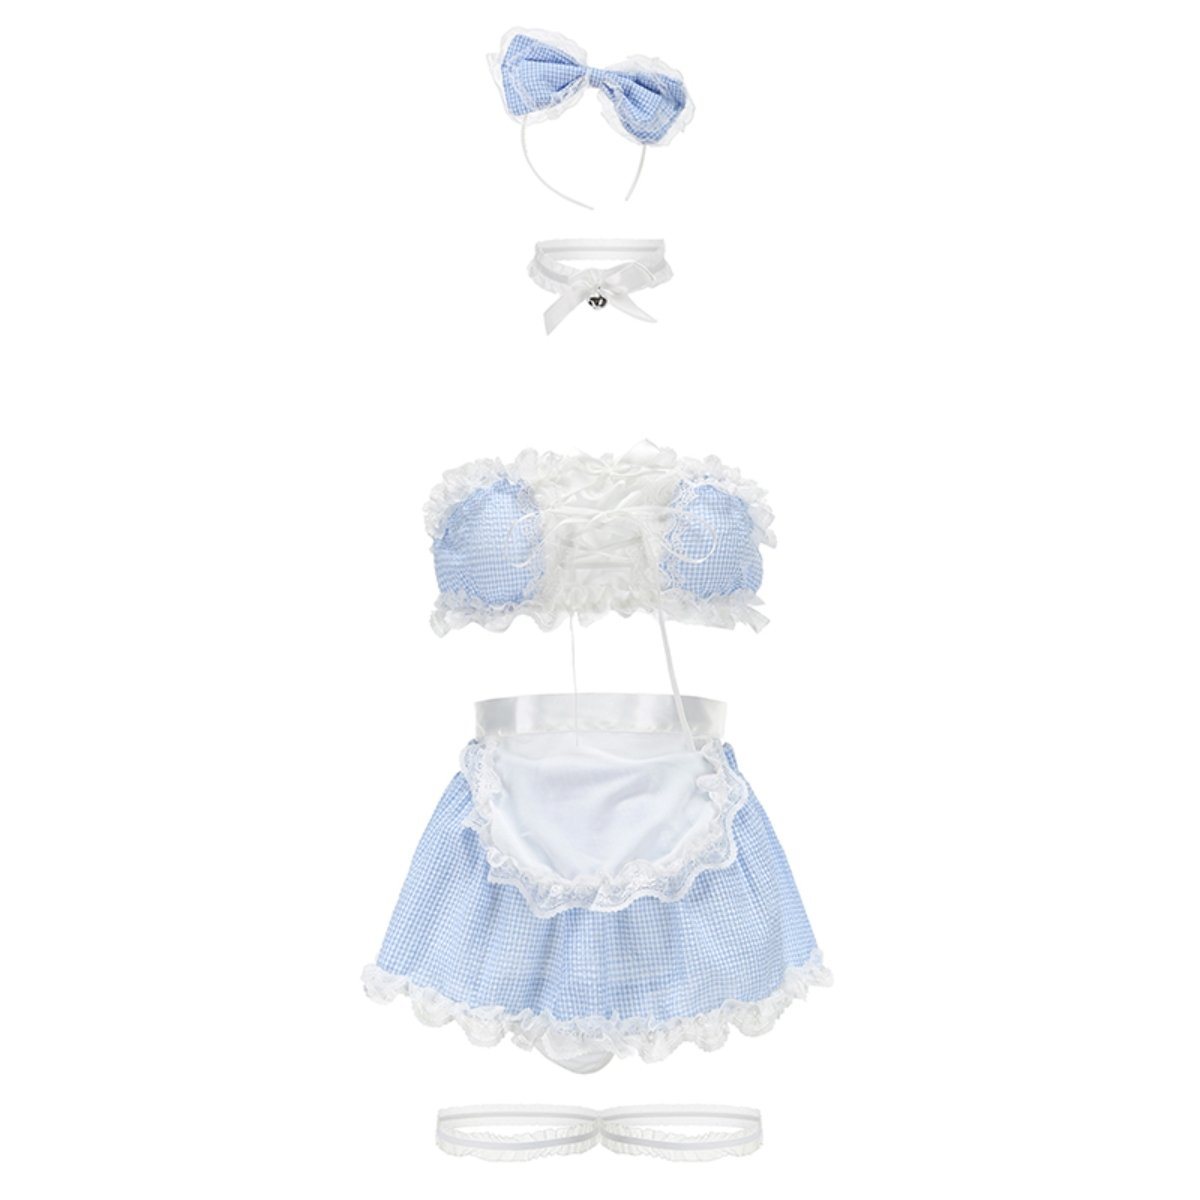 French maid lingerie set Intimates LOVEFREYA 